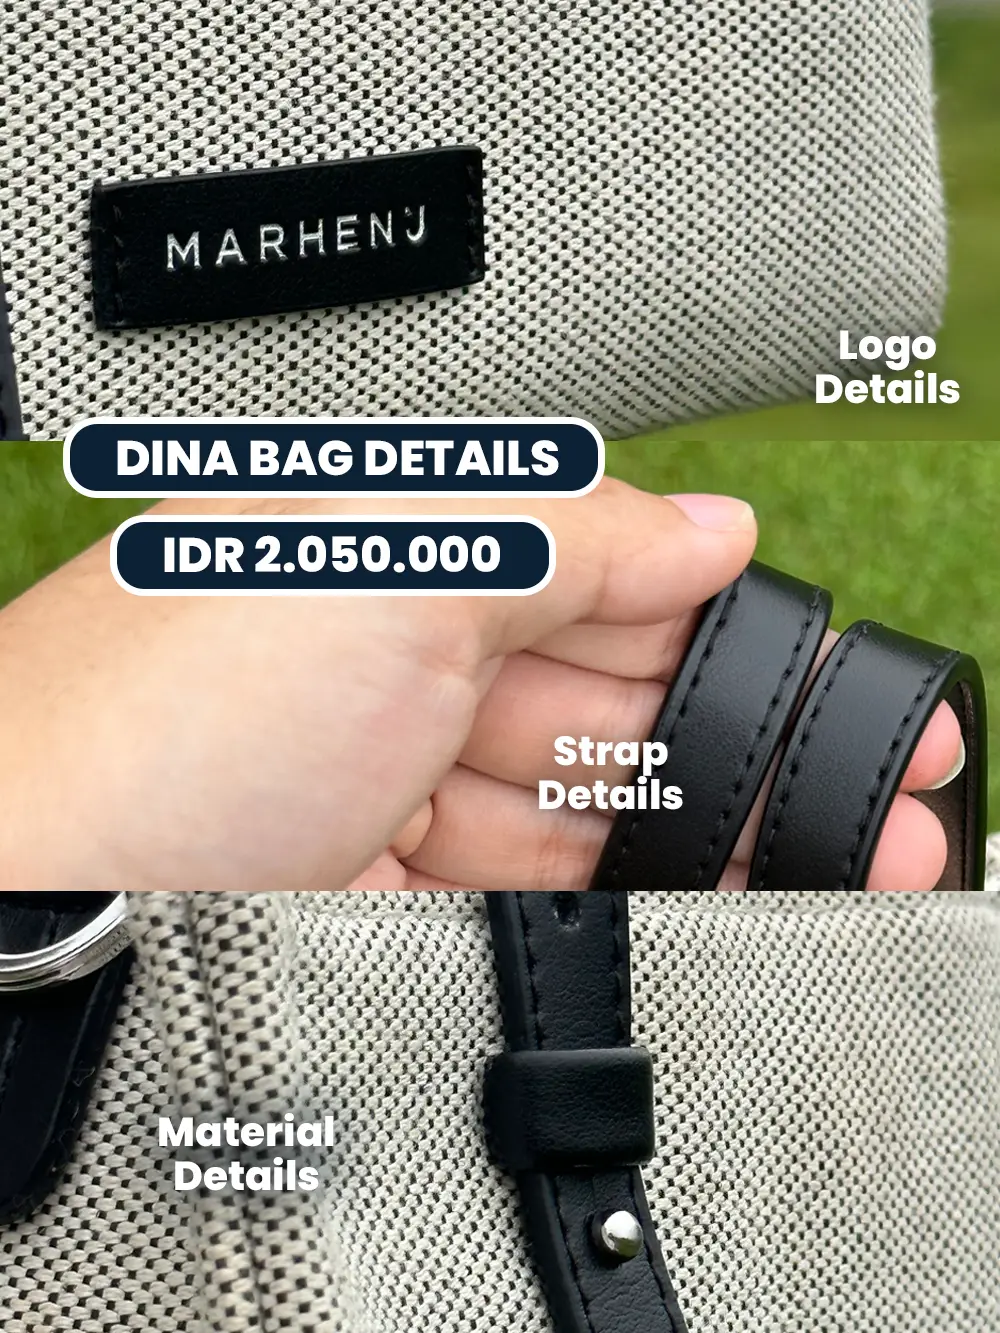 Review MARHEN J Dina Black Bag, Worth It or Not?